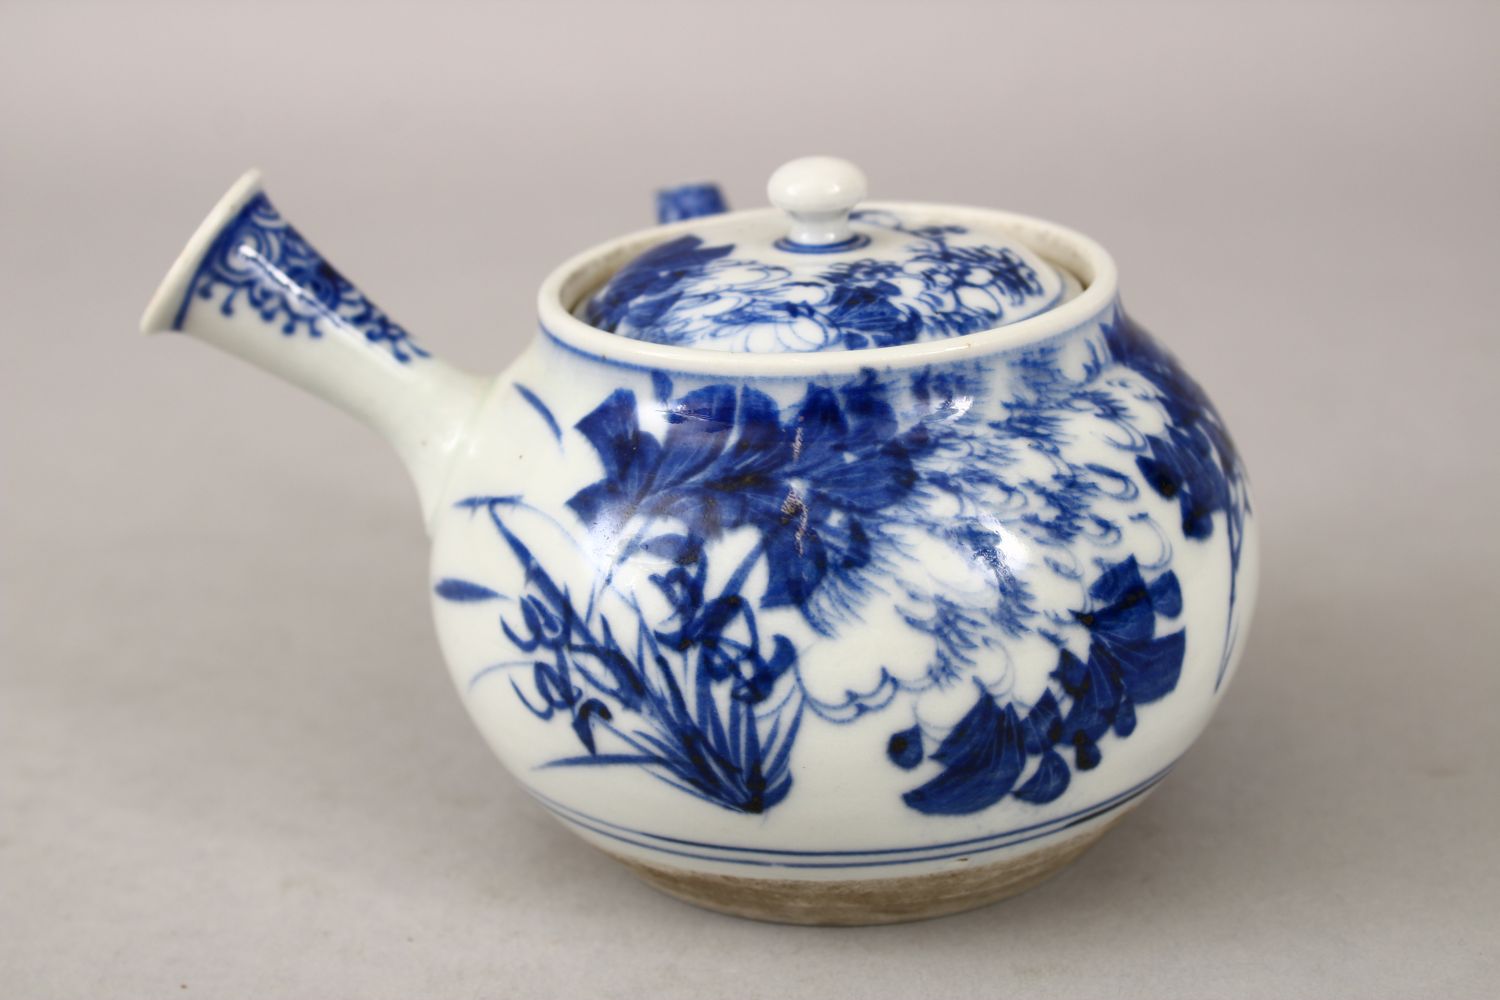 A 19TH CENTURY JAPANESE BLUE & WHITE PORCELAIN SAKE POT / TEA POT, decorated with native scenes of - Image 2 of 5